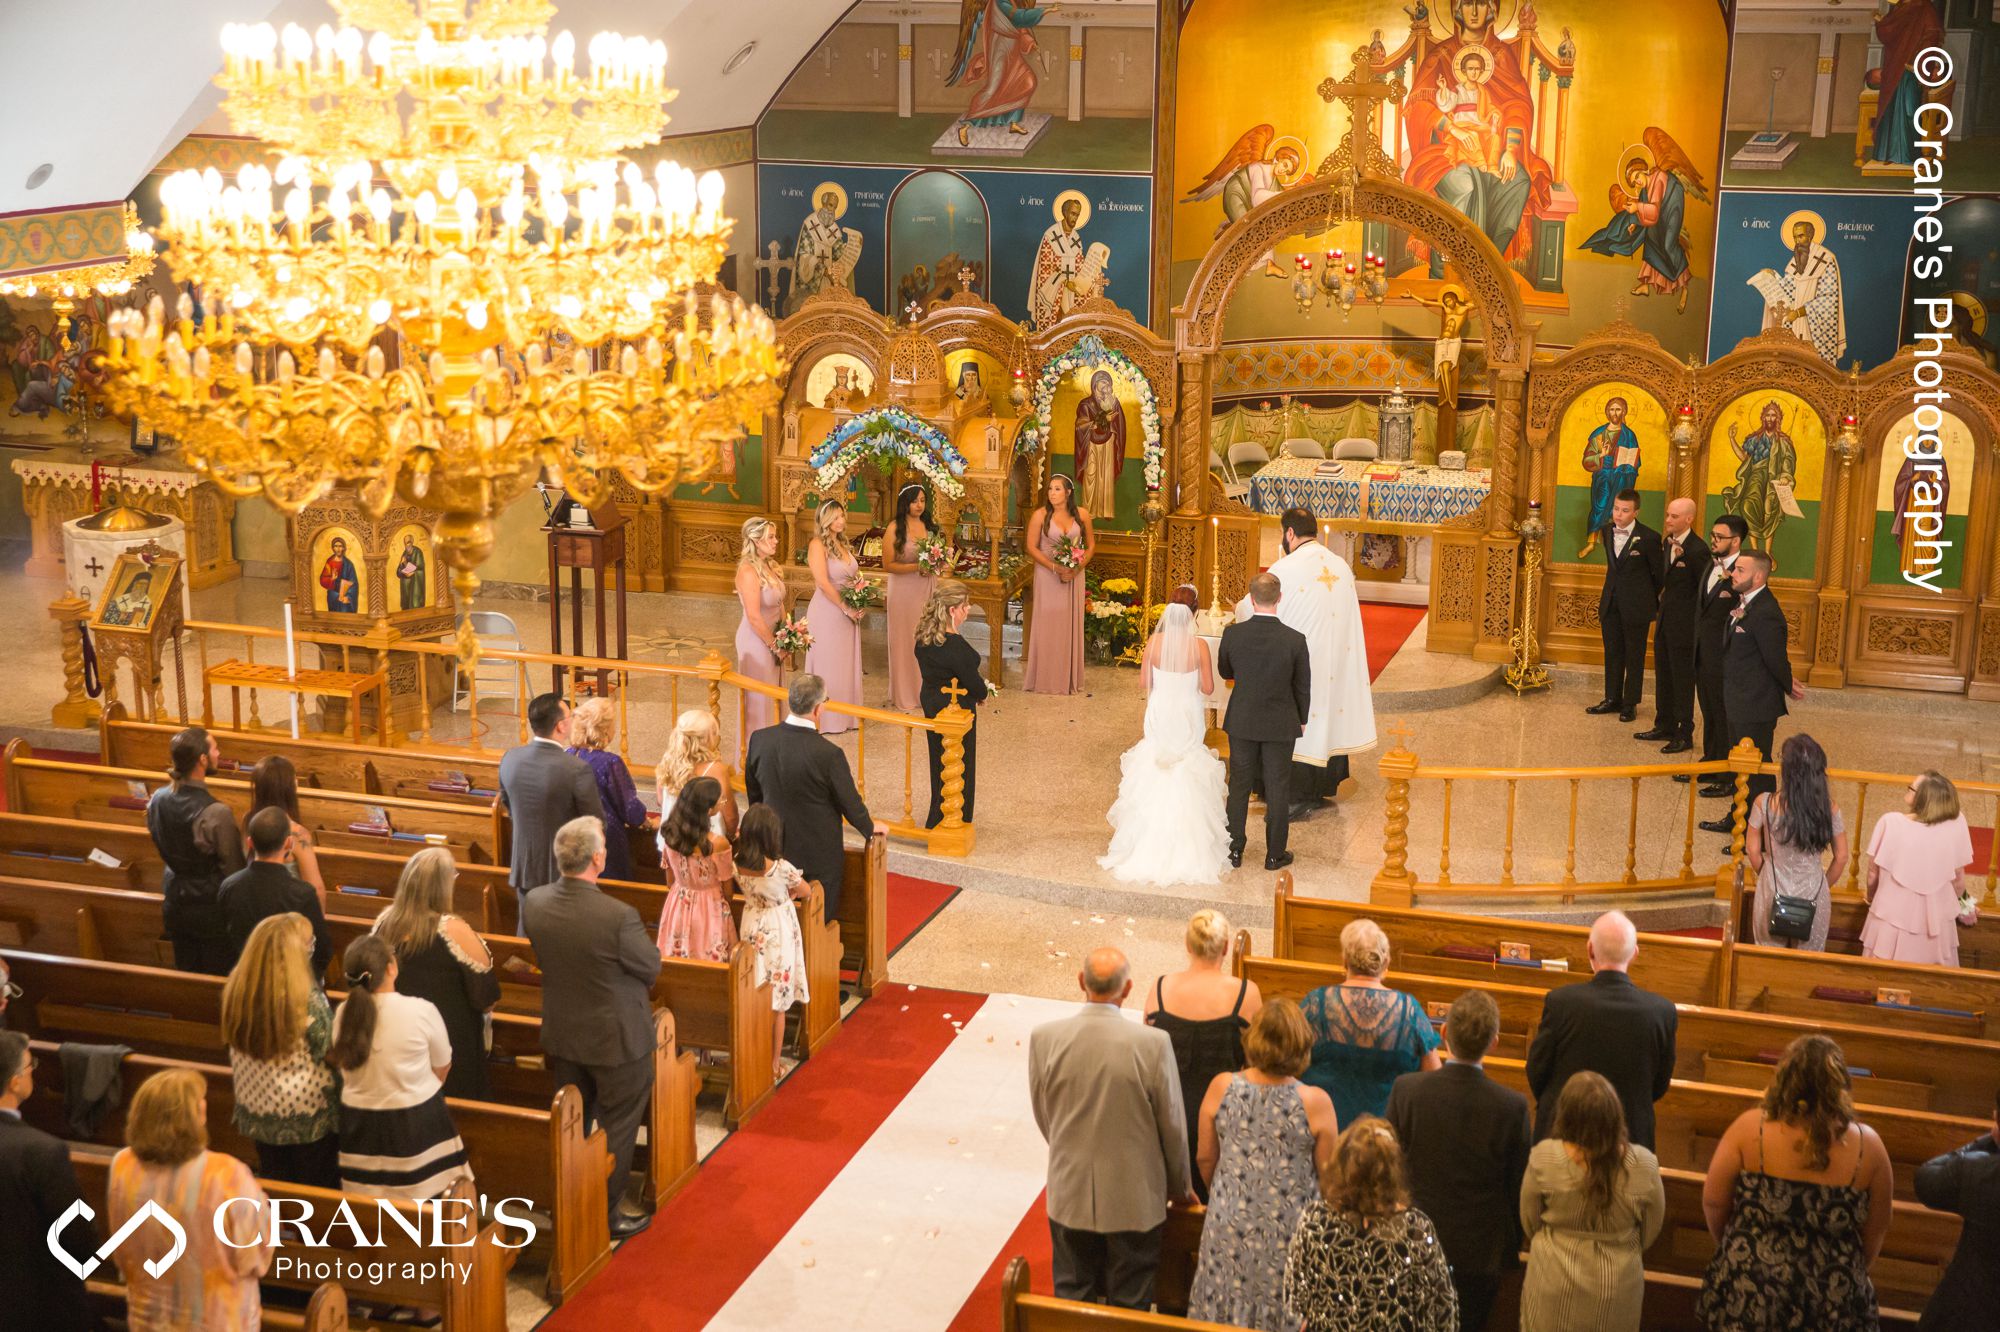 A wide angle image of a greek orthodox wedding ceremony taken from the balcony at St. Nectarios at Palatine, IL